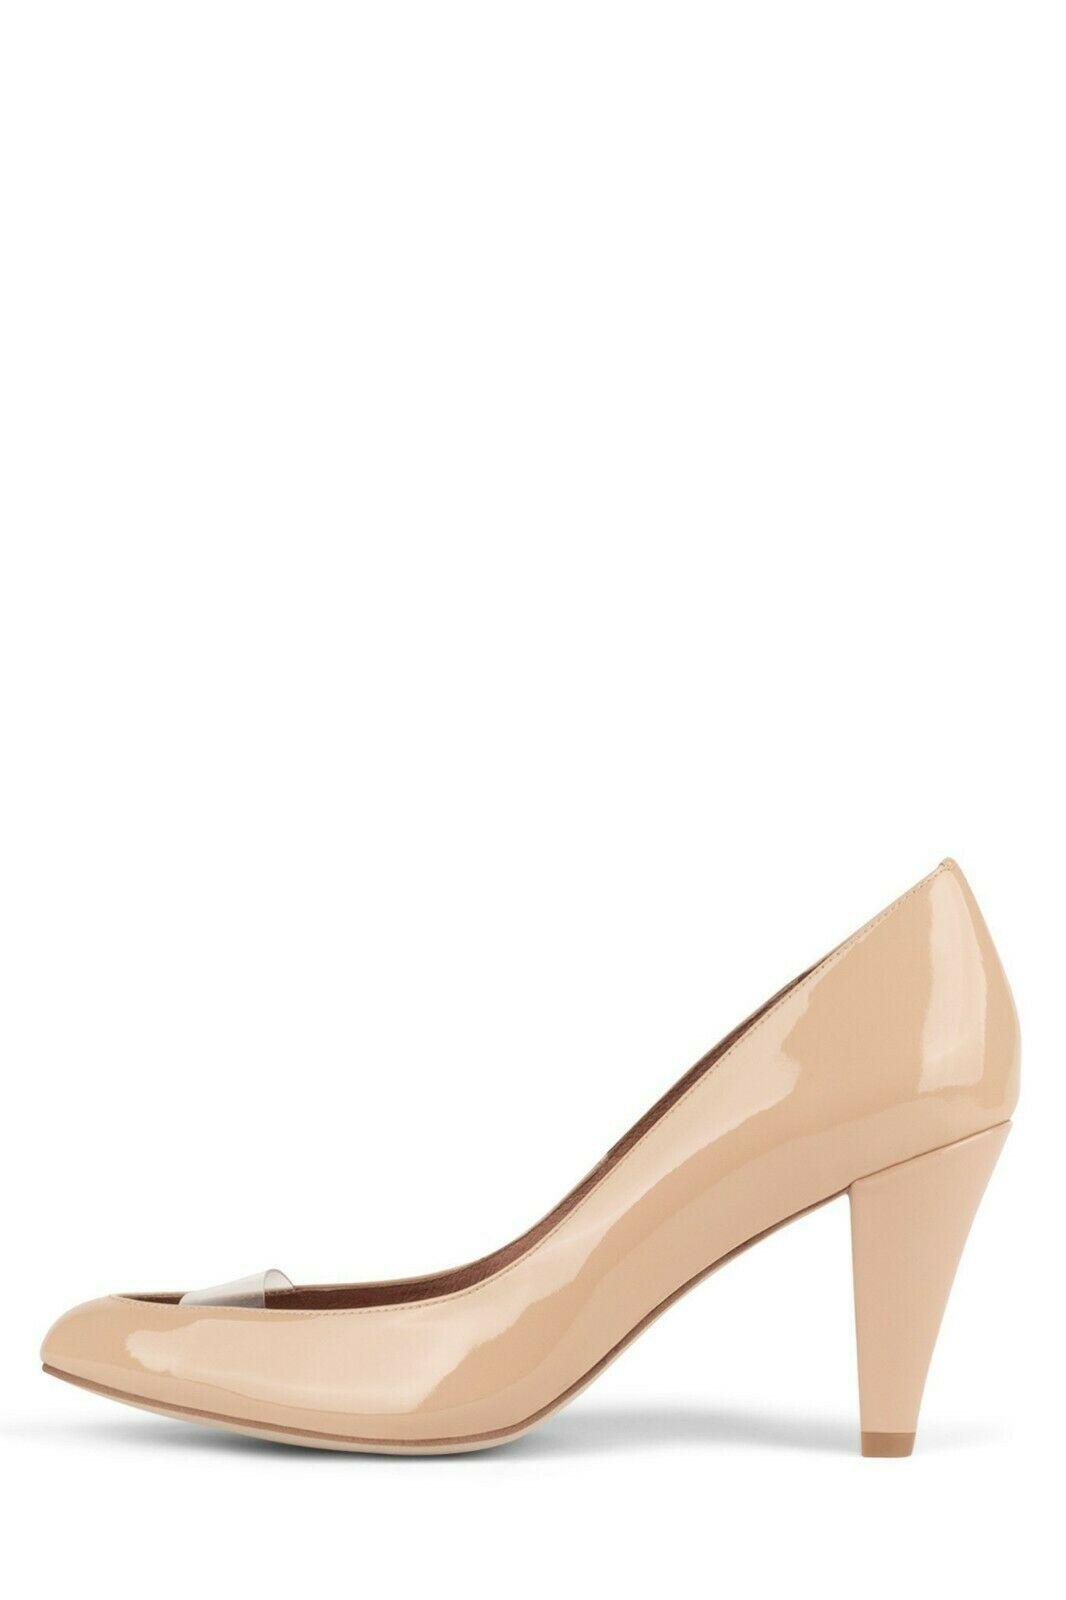 Jeffrey Campbell LASSIE Nude Patent Leather With Transparent Strip Pumps Size 8 - SVNYFancy